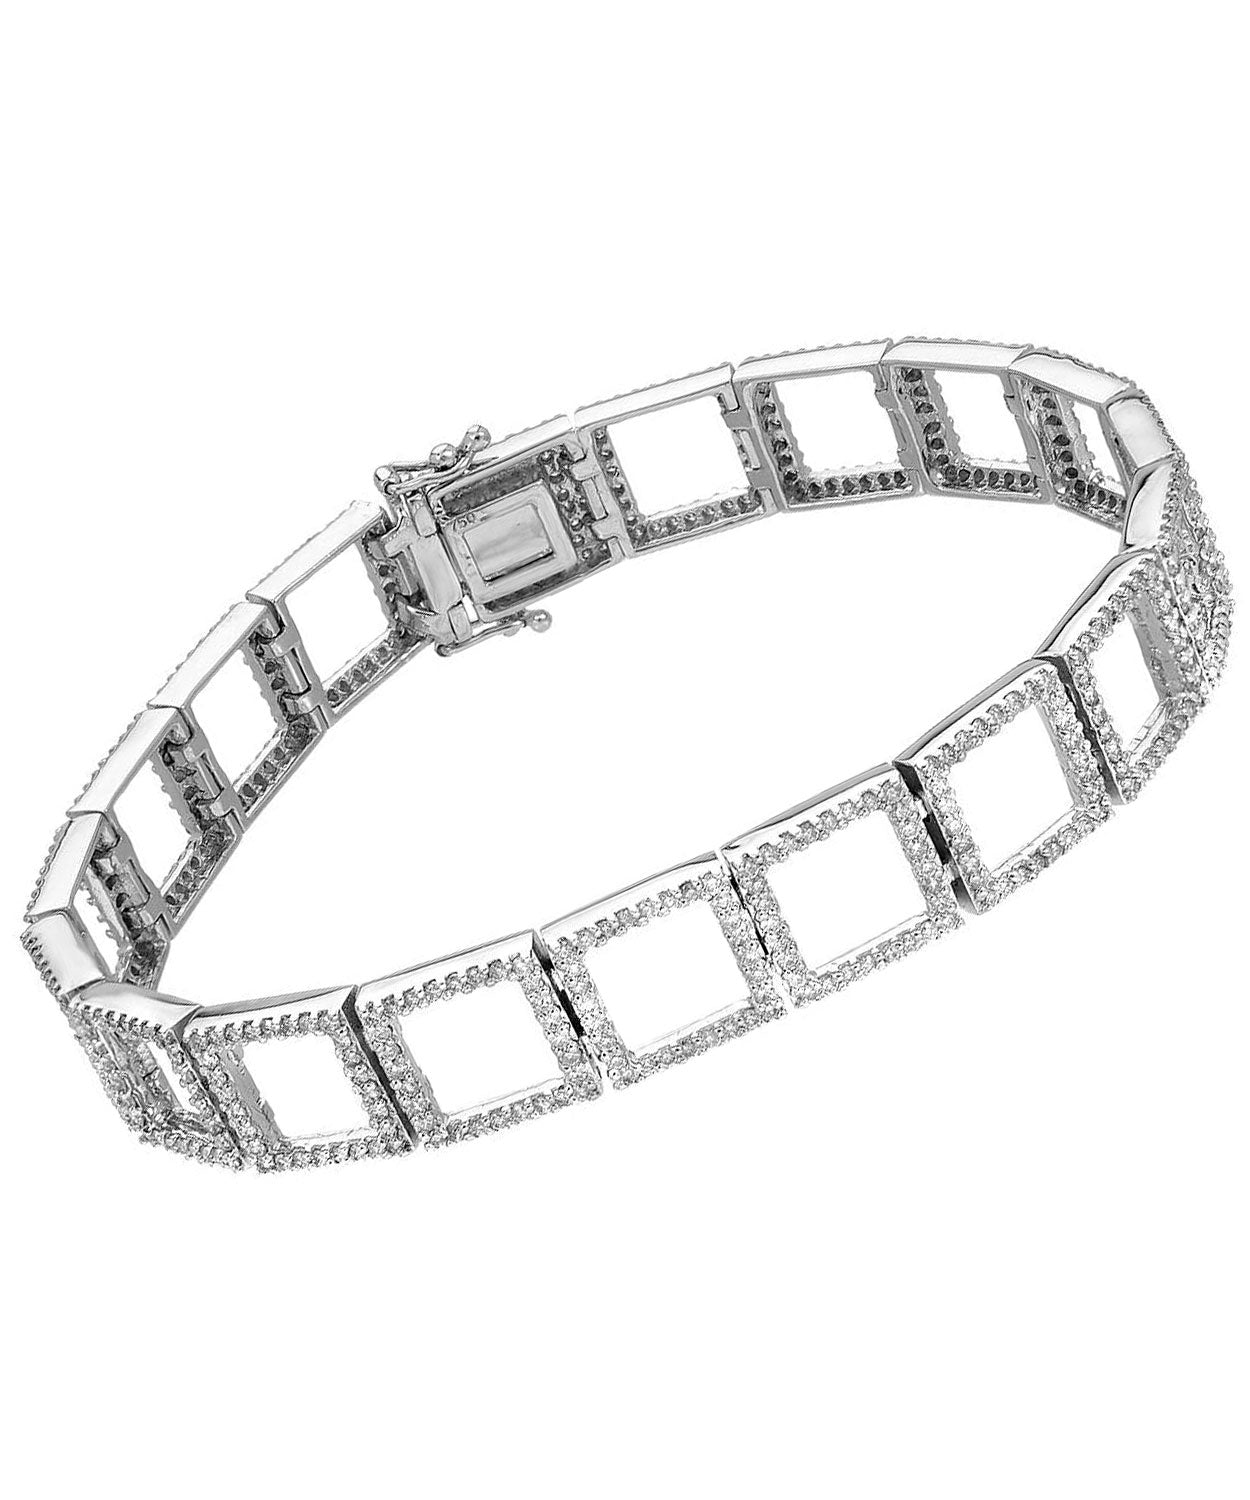 Glamour Collection 2.95 ctw Diamond 18k White Gold Square Link Bracelet View 1